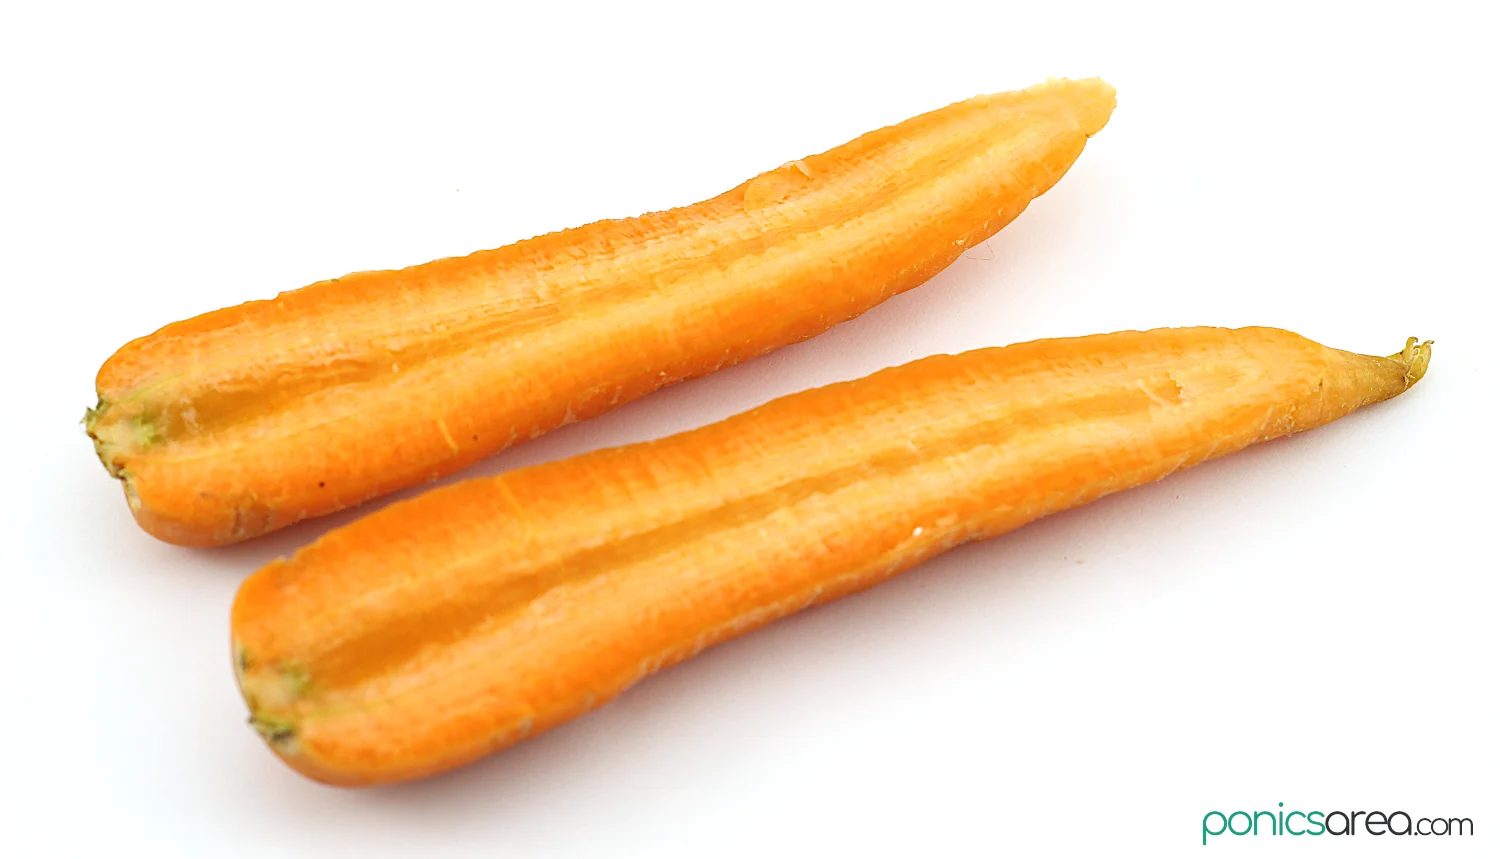 carrots do not have seeds